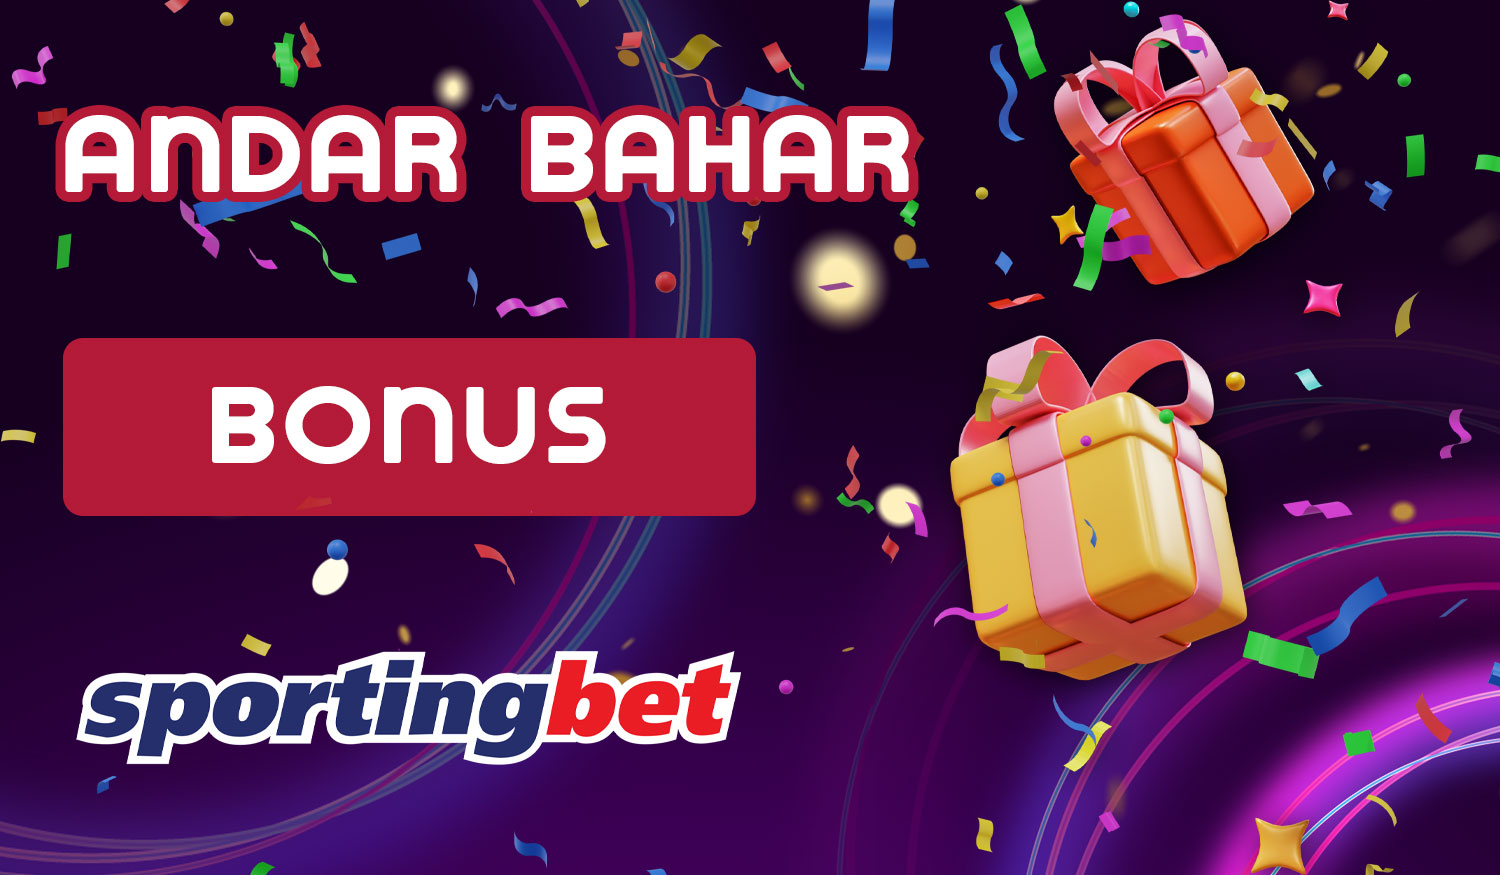 Players who sign up and play Andar Bahar on Sportingbet online are greeted with a generous welcome bonus